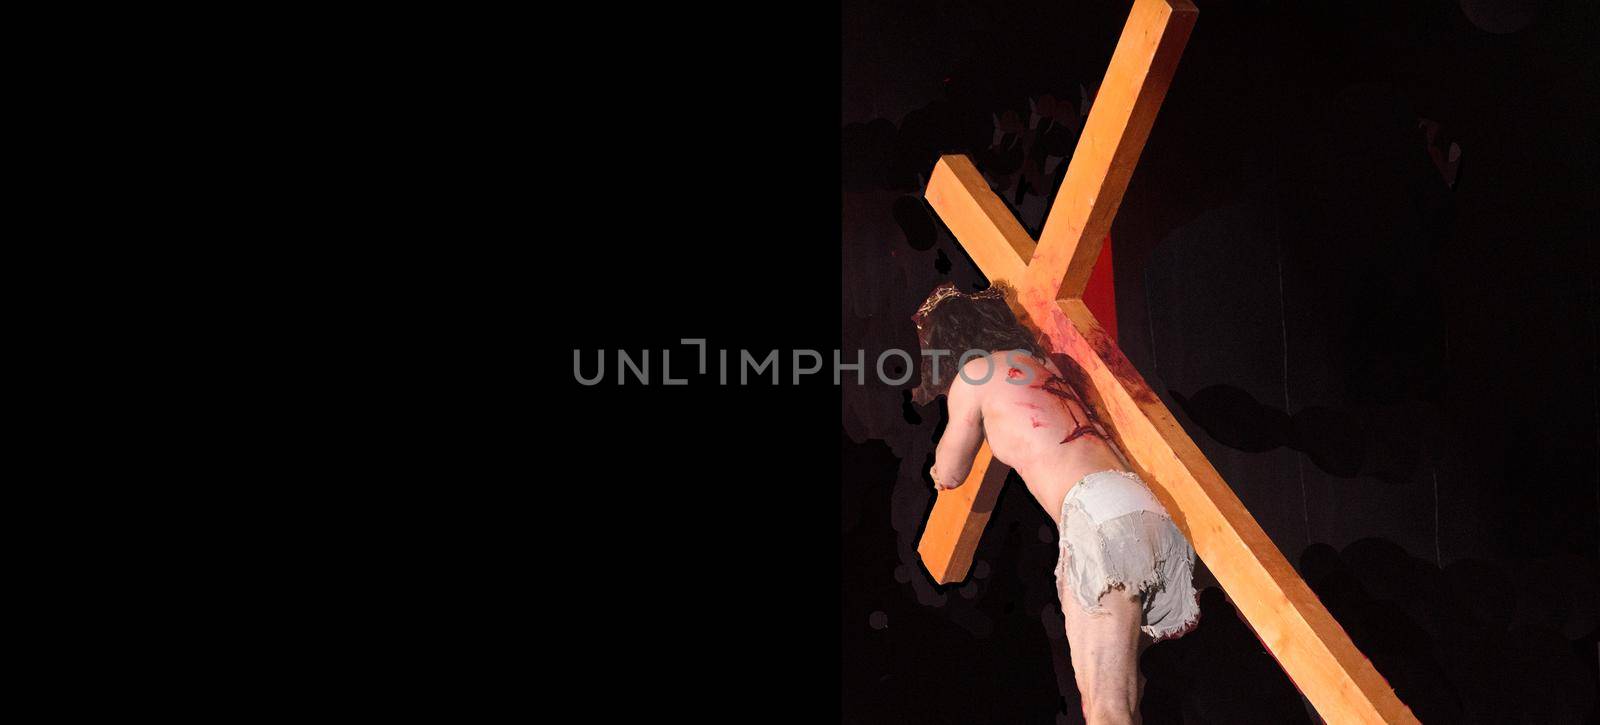 Jesus carrying the Cross into the darkness.Crucifixion of Jesus.Easter banner concept.